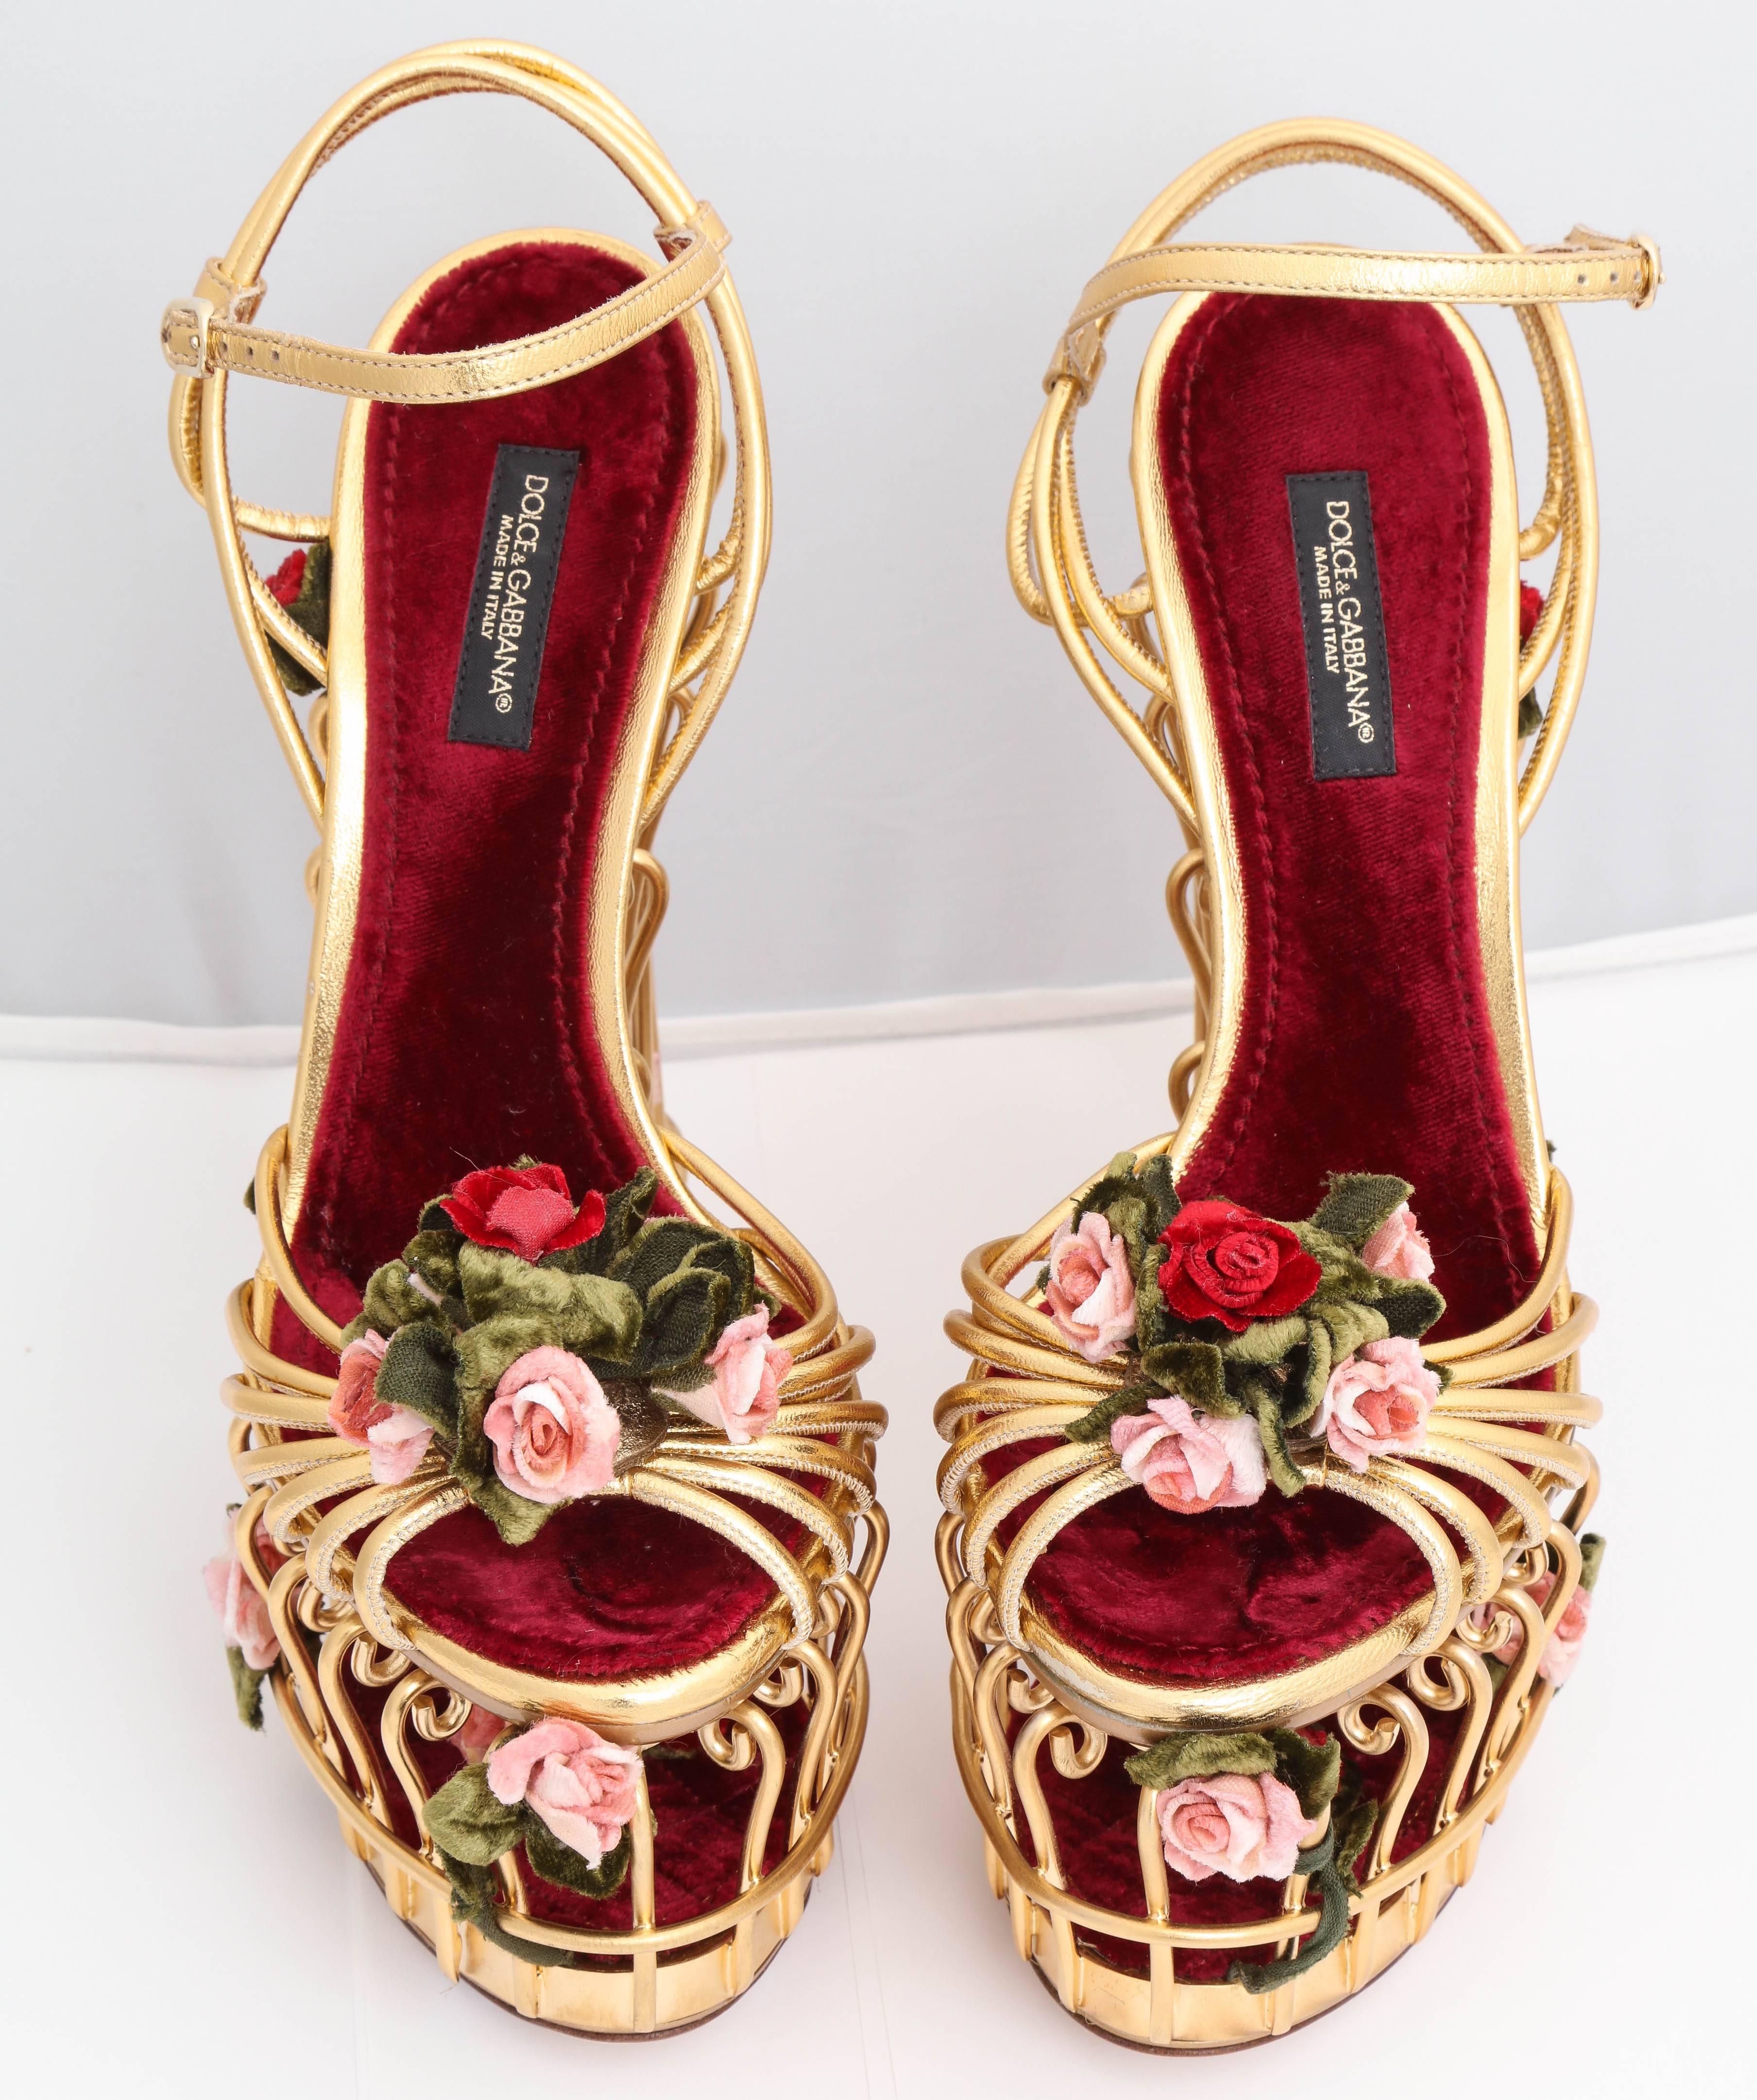 Very rare Dolce & Gabbana cage shoes as seen on runway. This is a piece of art! It has Velvet insole. New with box. Size 37. Front: 3.1 inches, Heels: 7.1 inches.
Original retail $6900.